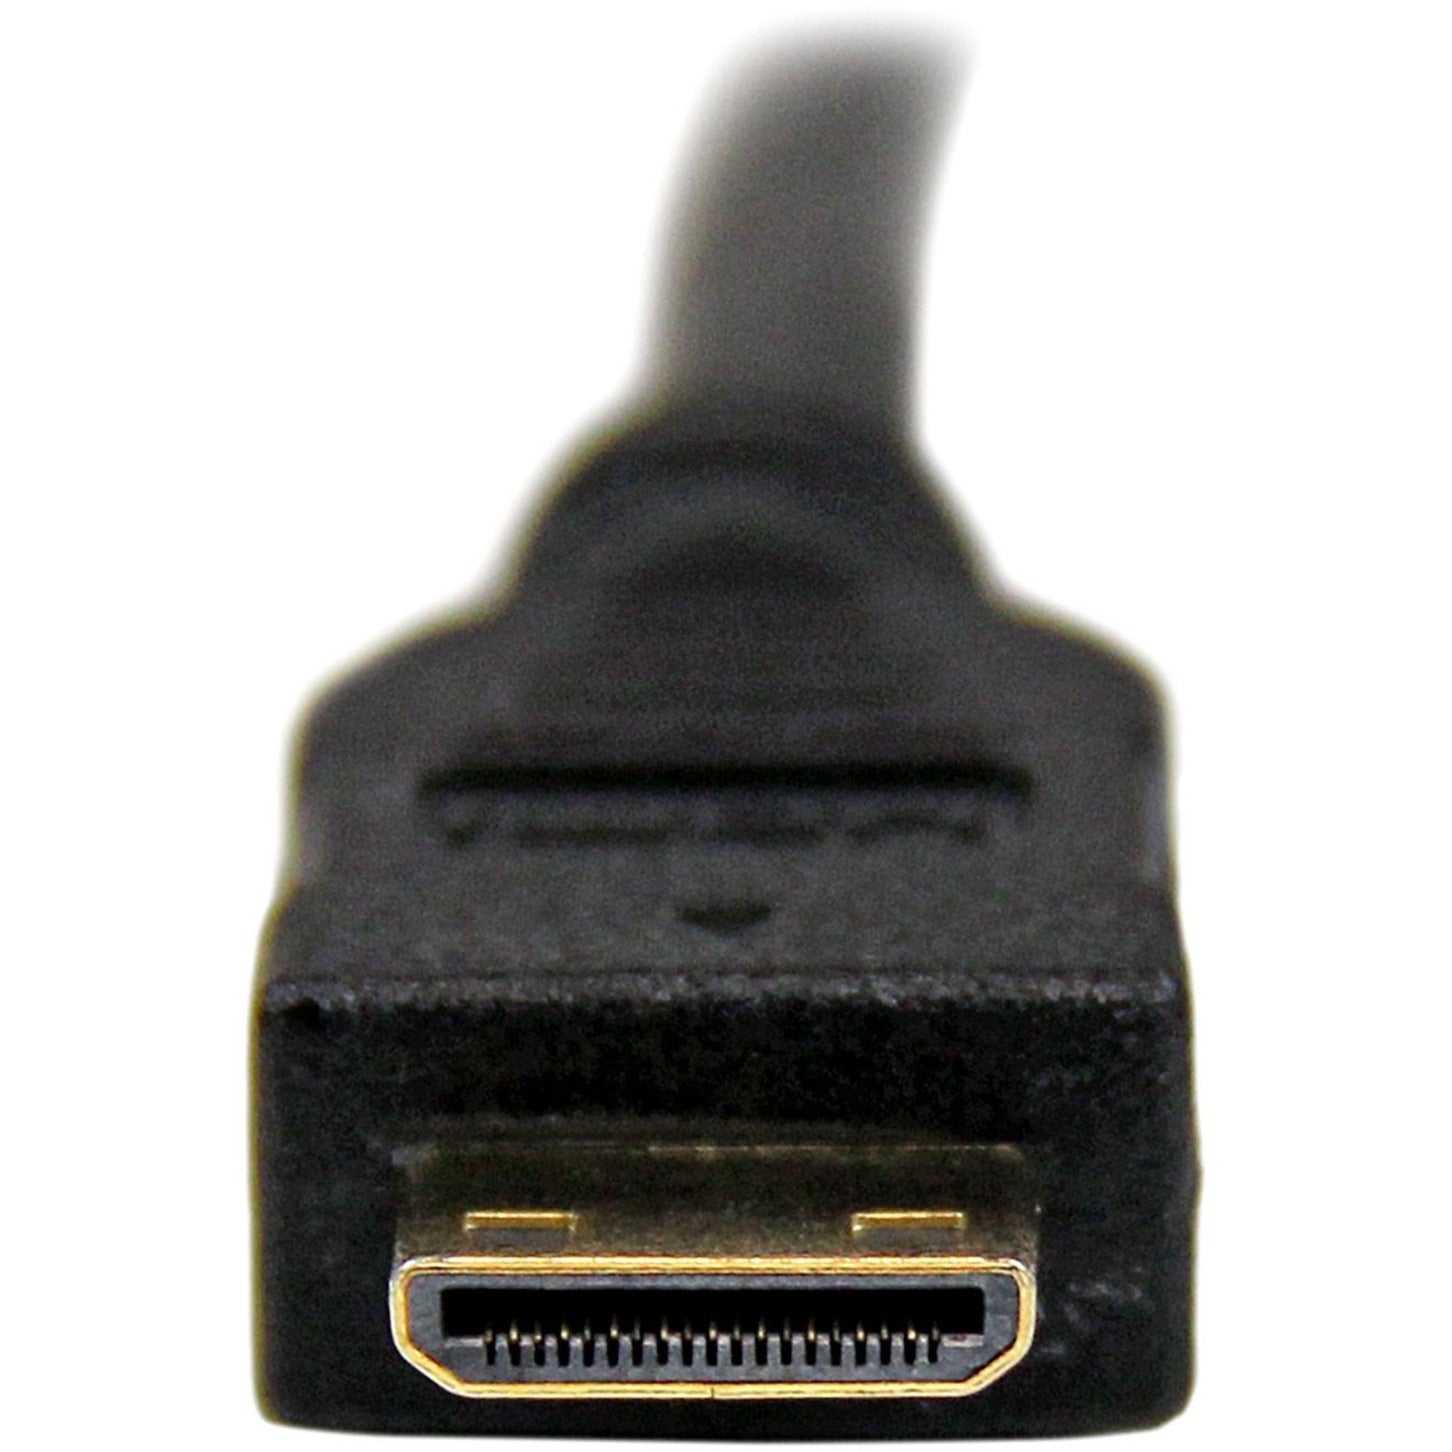 StarTech.com HDCDVIMM1M 1m Mini HDMI to DVI-D Cable - M/M, Molded, Strain Relief, EMI Protection, Damage Resistant, Fray Resistant, Active, 3.28 ft, Gold Plated Connectors, 1920 x 1200 Supported Resolution